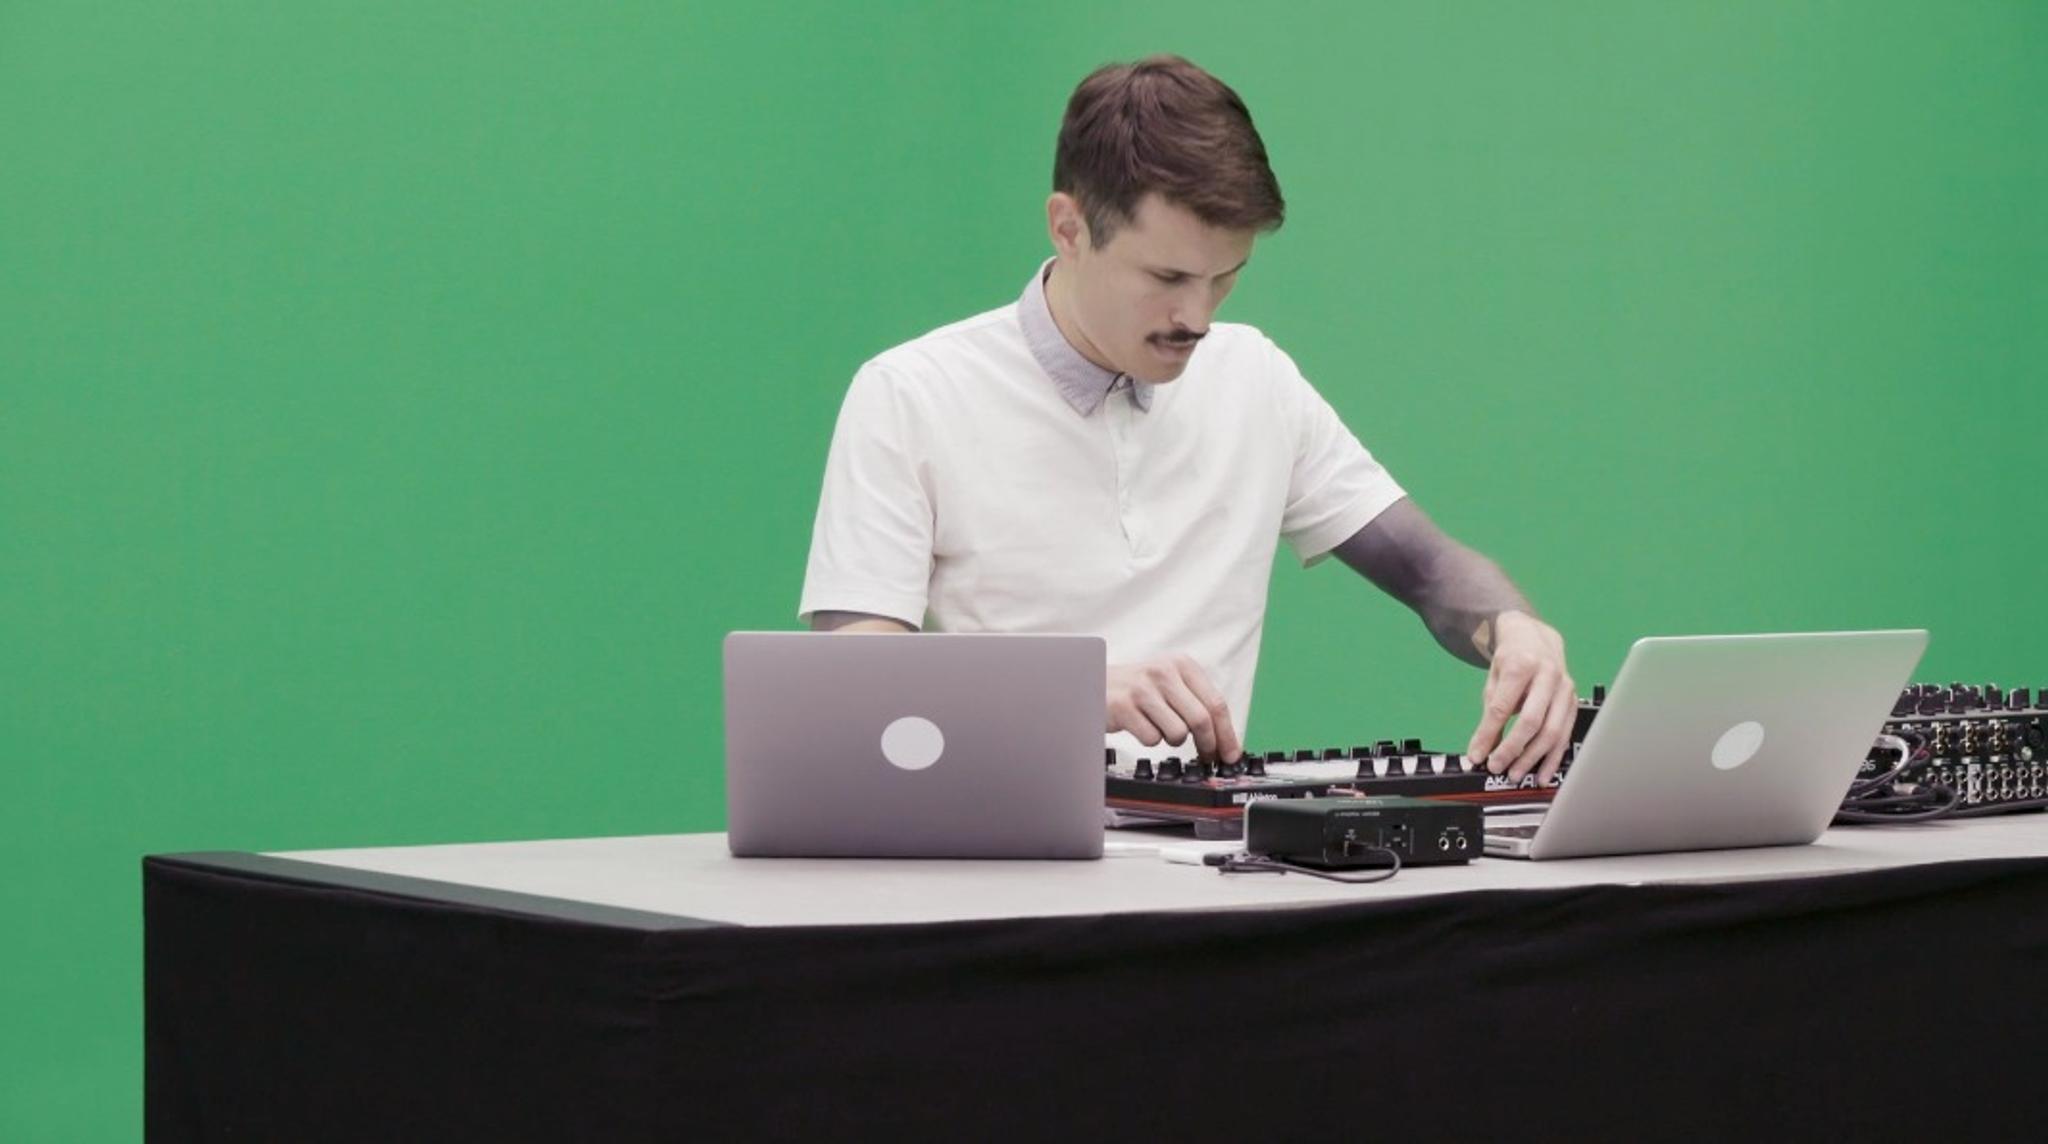 Alex.Do plays a live set on a green screen. He uses a launchpad, a mixer and 2 laptops.